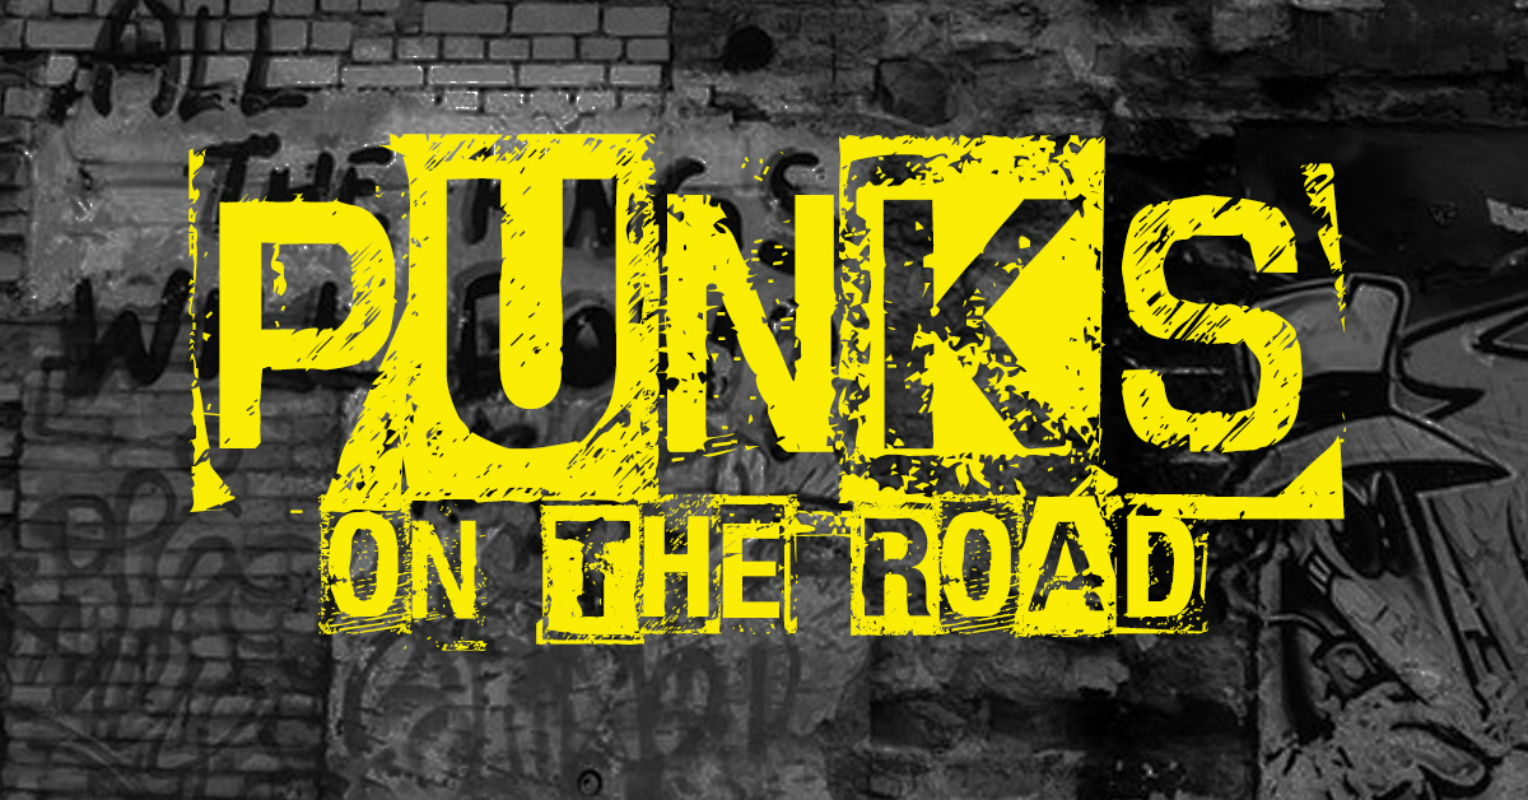 "PUNKS ON THE ROAD"